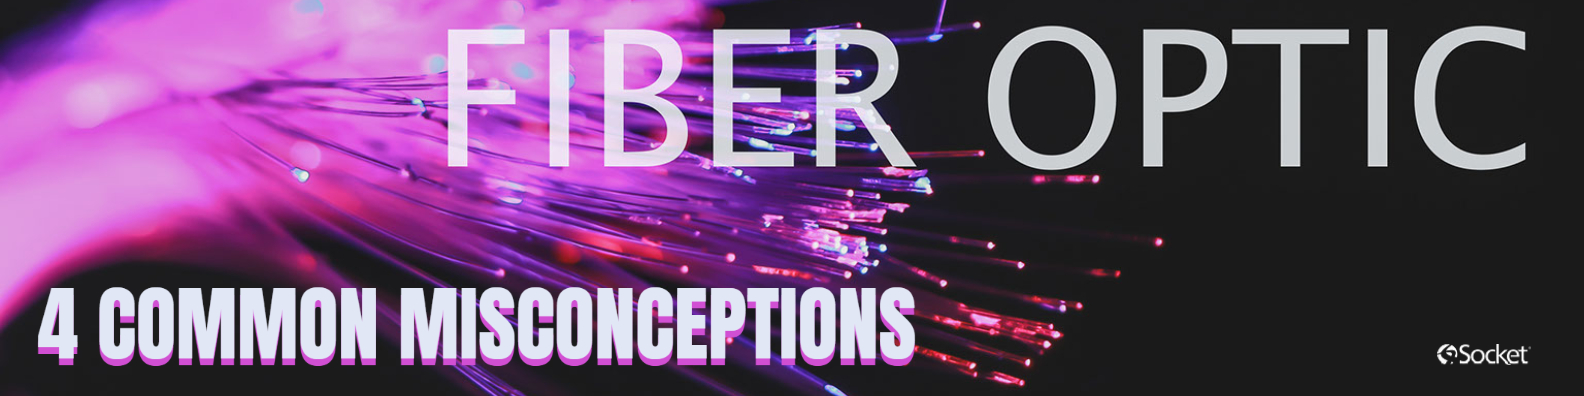 purple and pink fiber optic cable with text overlay that reads "Fiber optic. 4 common misconceptions."